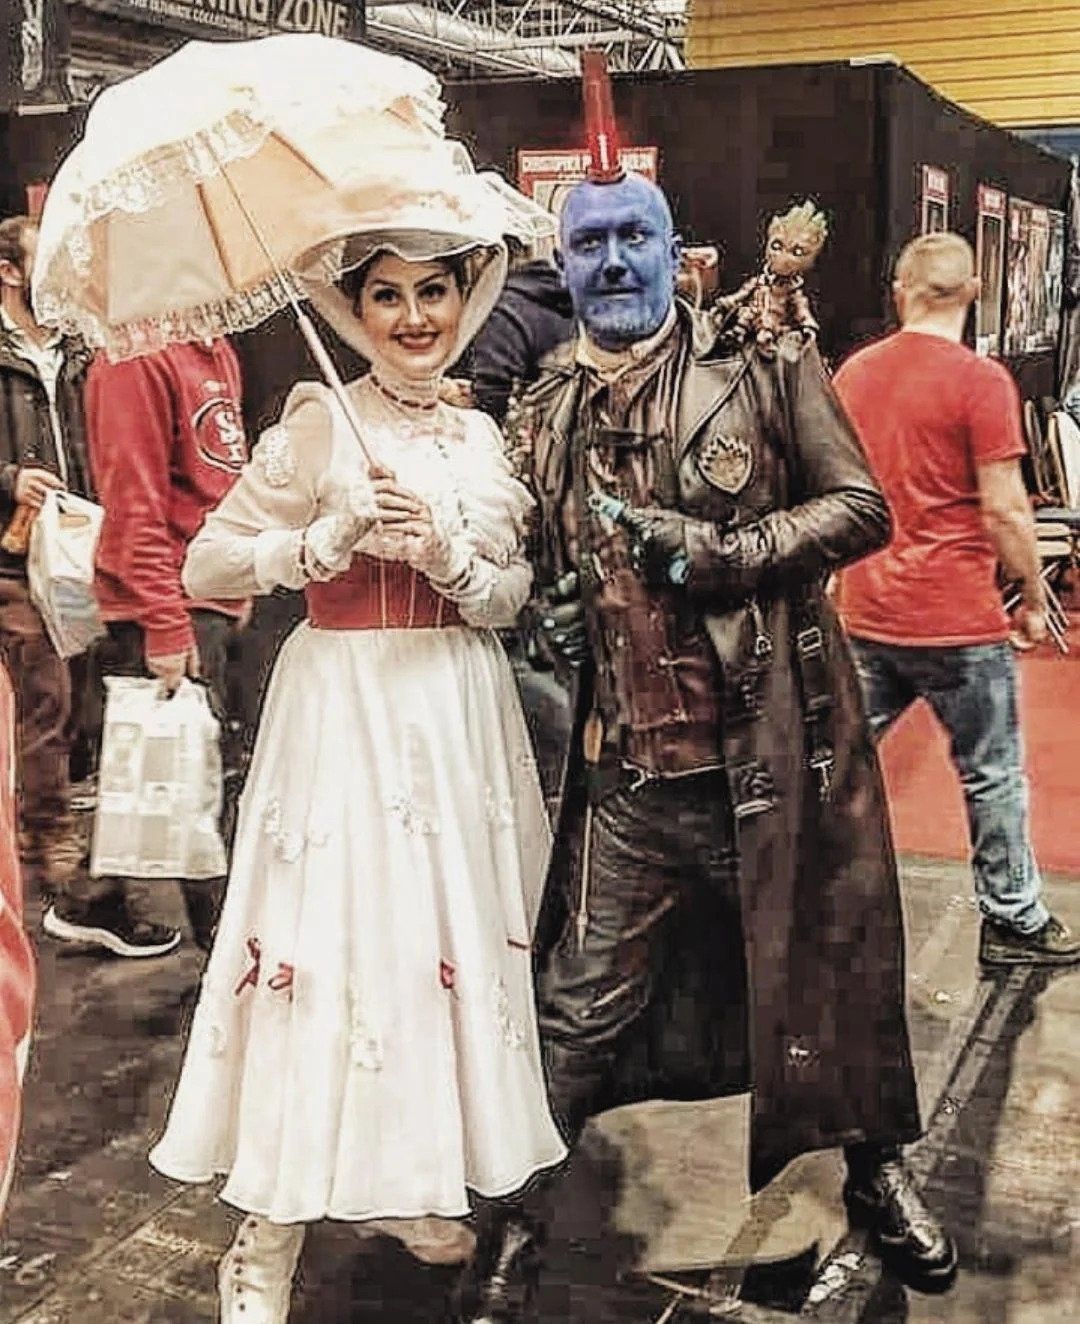 A cosplay of Mary Poppins smiling and taking a photo with Yondu from Guardians of the Galaxy